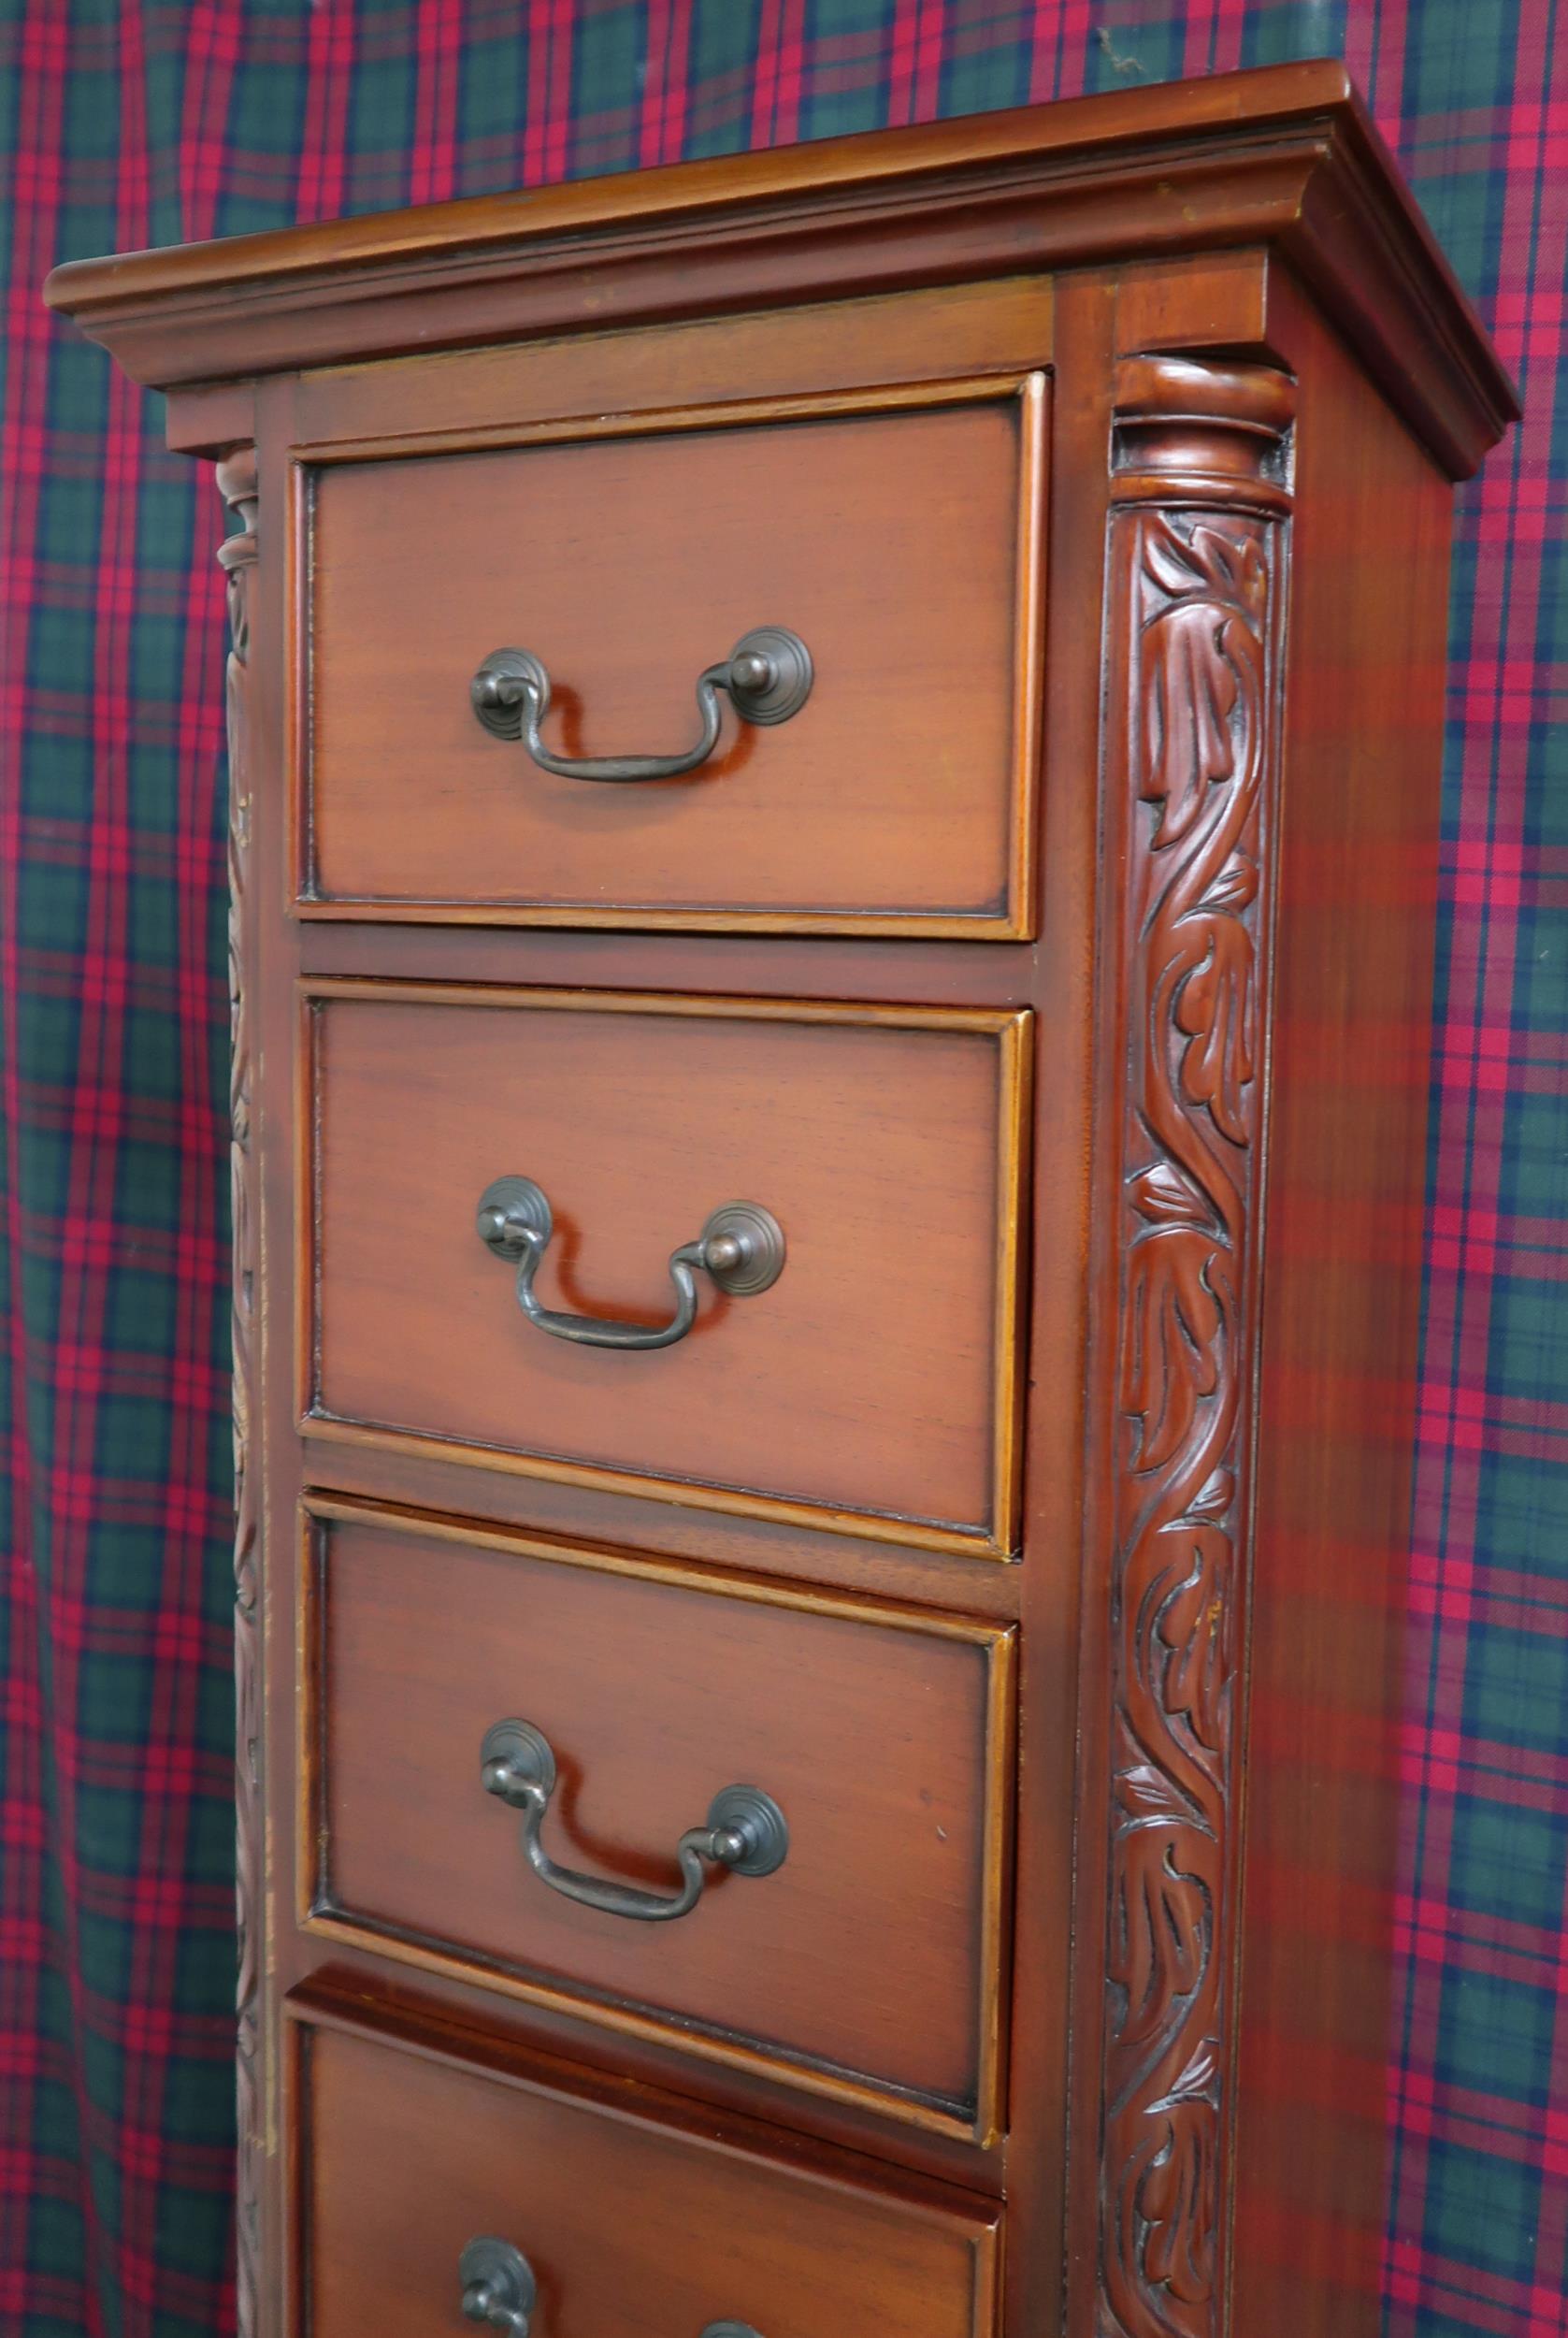 A 20th century mahogany tall boy chest with six drawers flanked by carved reliefs on ball and claw - Image 2 of 5